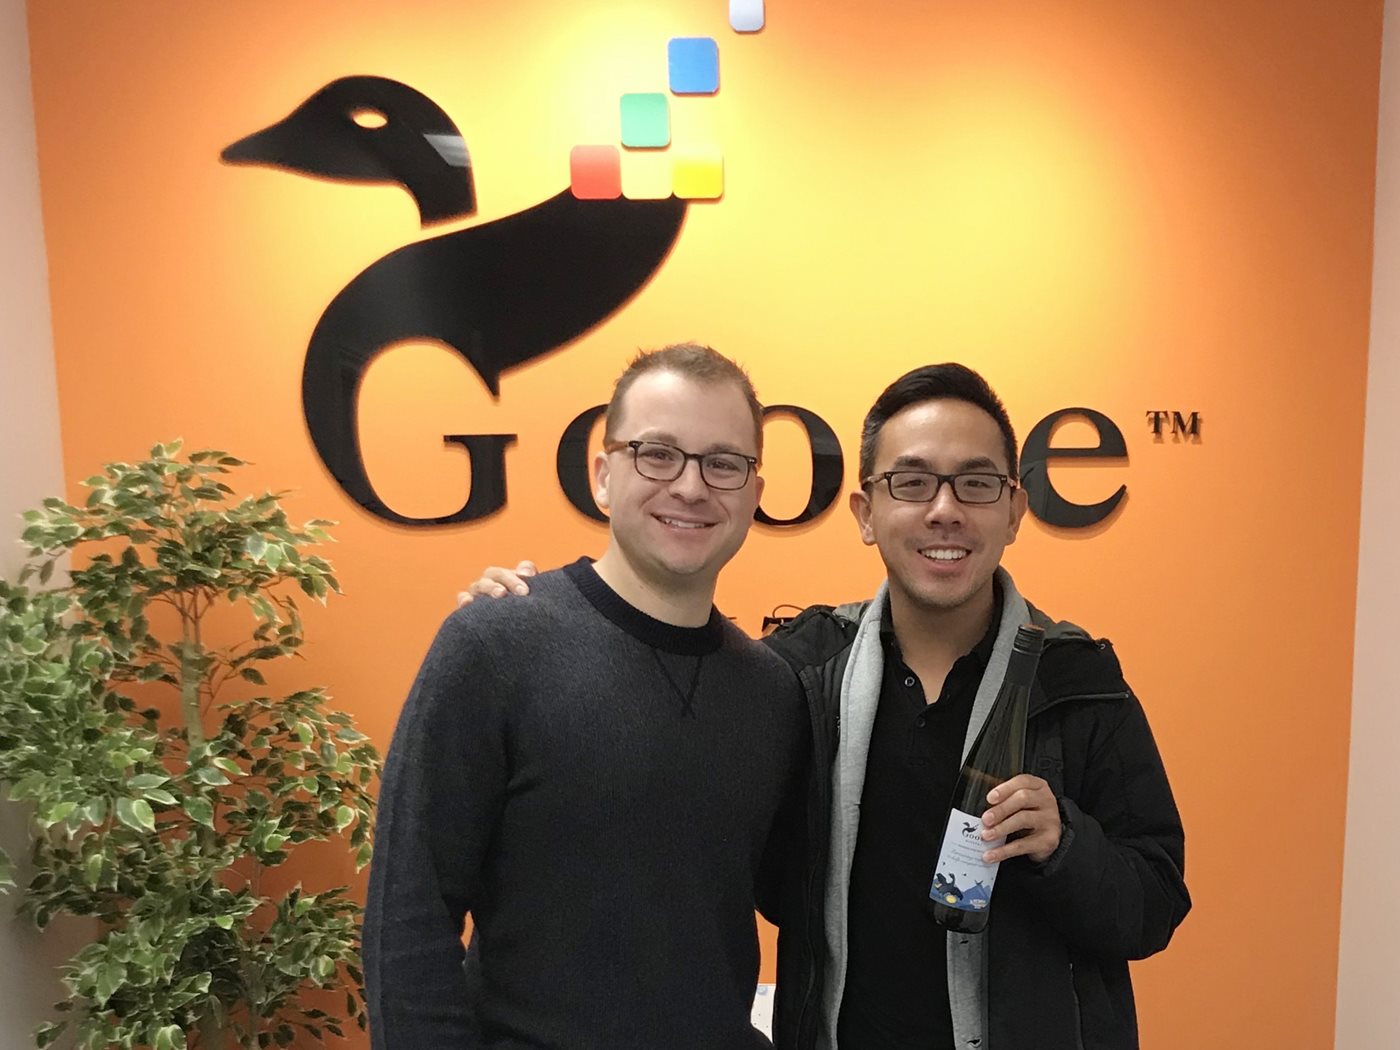 Michael Turcsanyi and a colleague stand in front of the Goose Digital logo in the Toronto, Ontario, office.